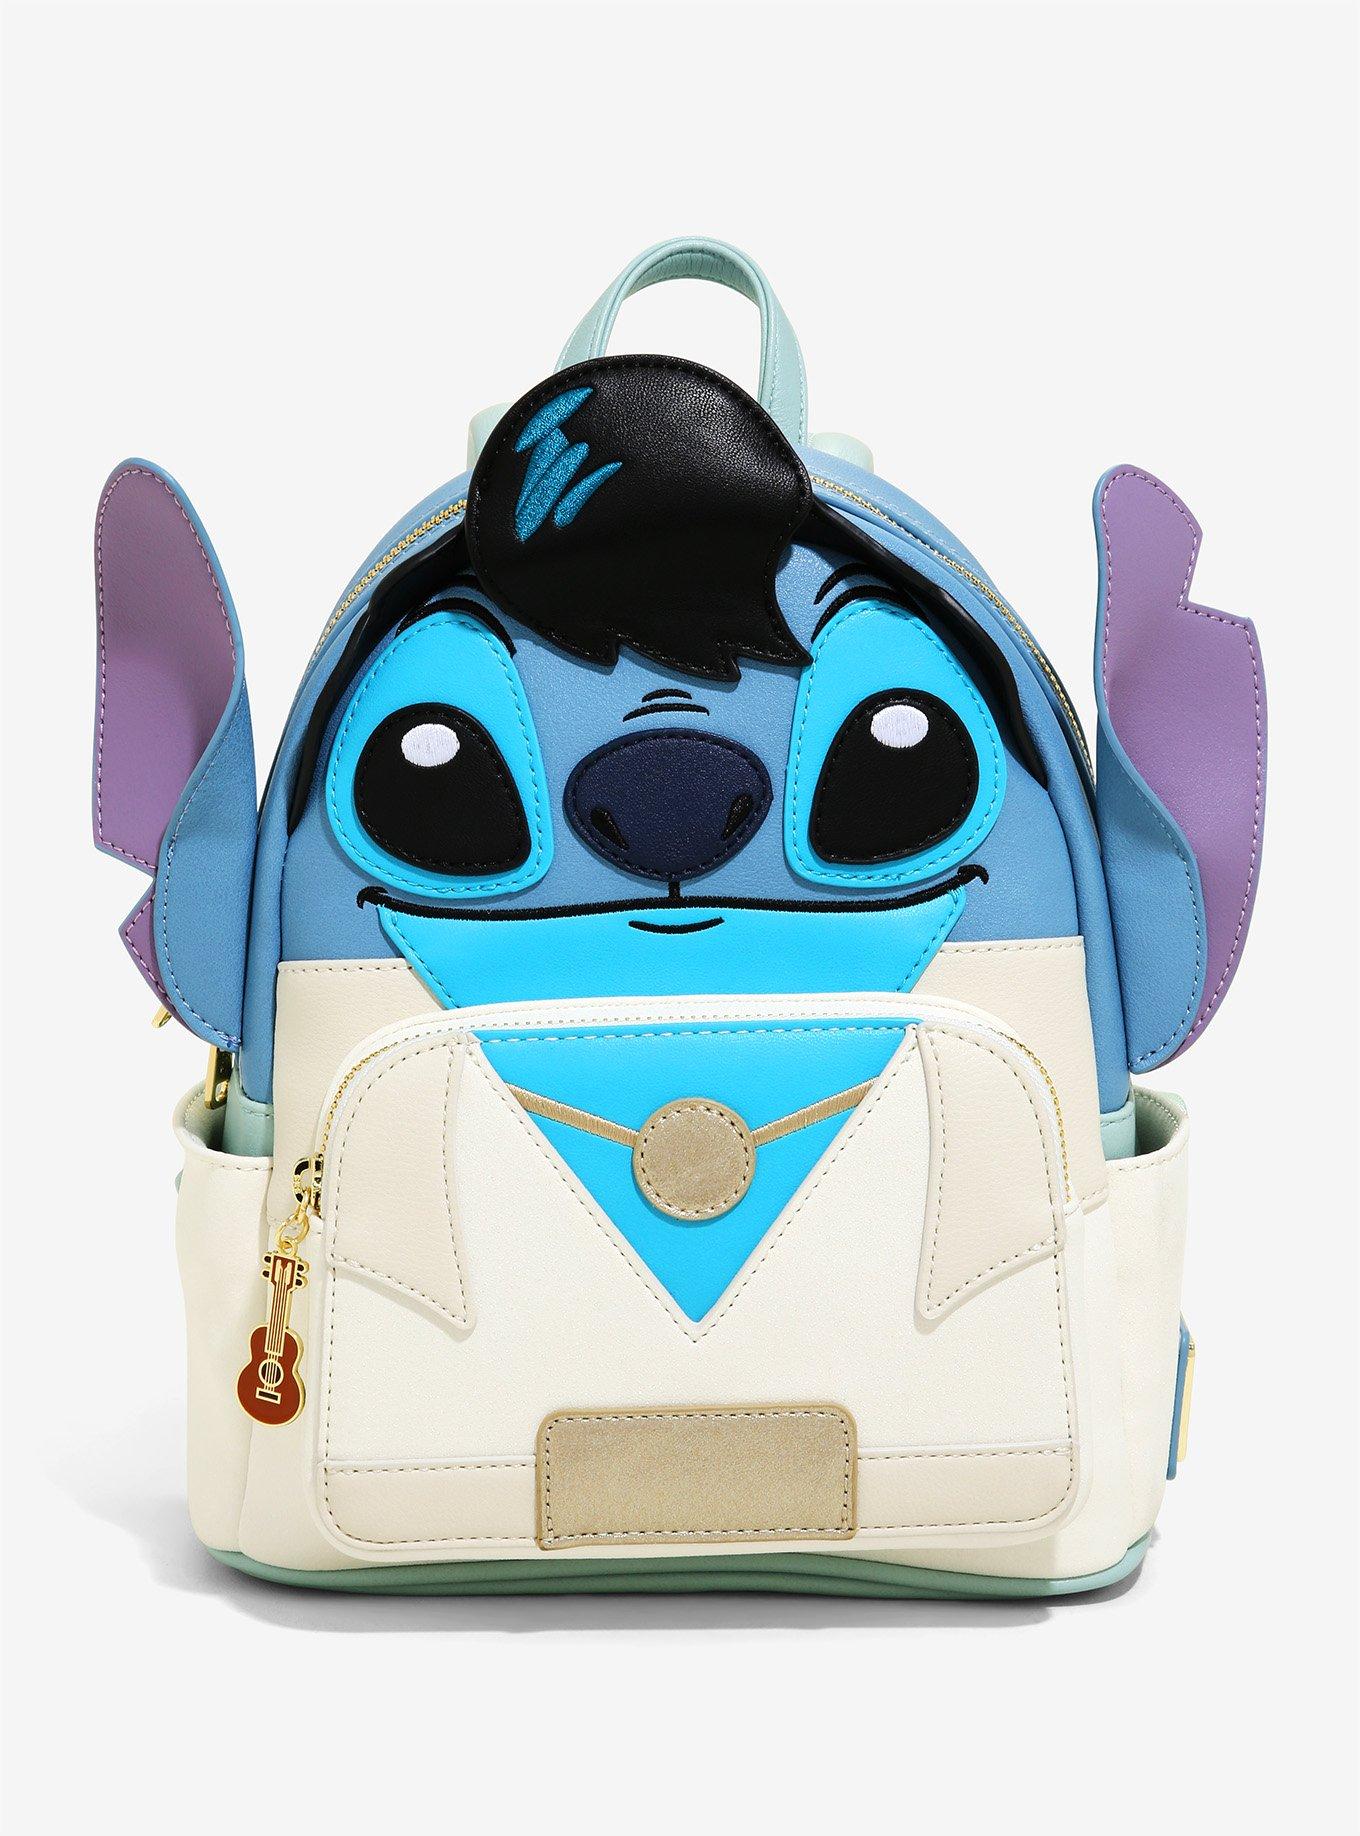 Loungefly stitch backpack  Stitch backpack, Louis vuitton twist bag,  Loungefly